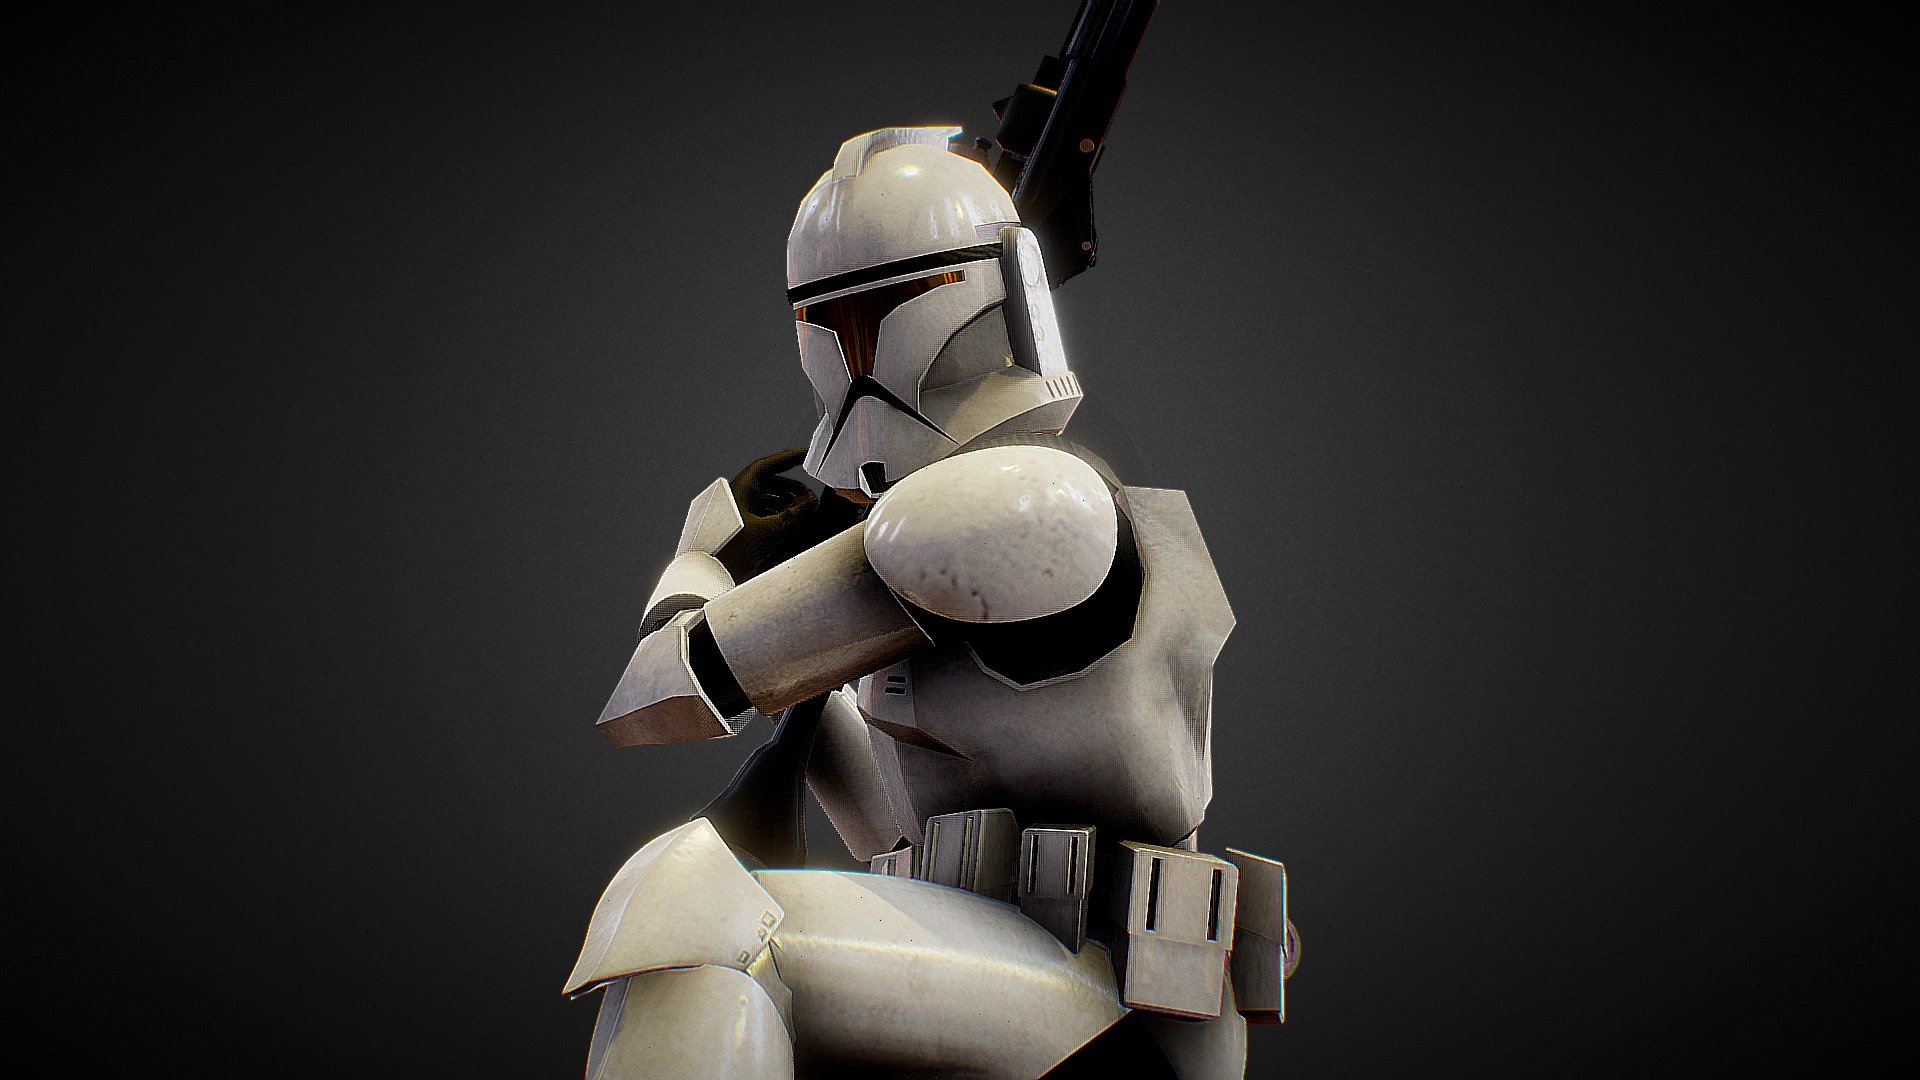 Clone trooper - Phase 1 as seen in episode II, and the clone wars series.
Modeled in Maya and textured with photoshop.
hope you like it - Clone trooper - Phase 1 - Buy Royalty Free 3D model by Roger Masats Vidal (@rogemv) 3d model